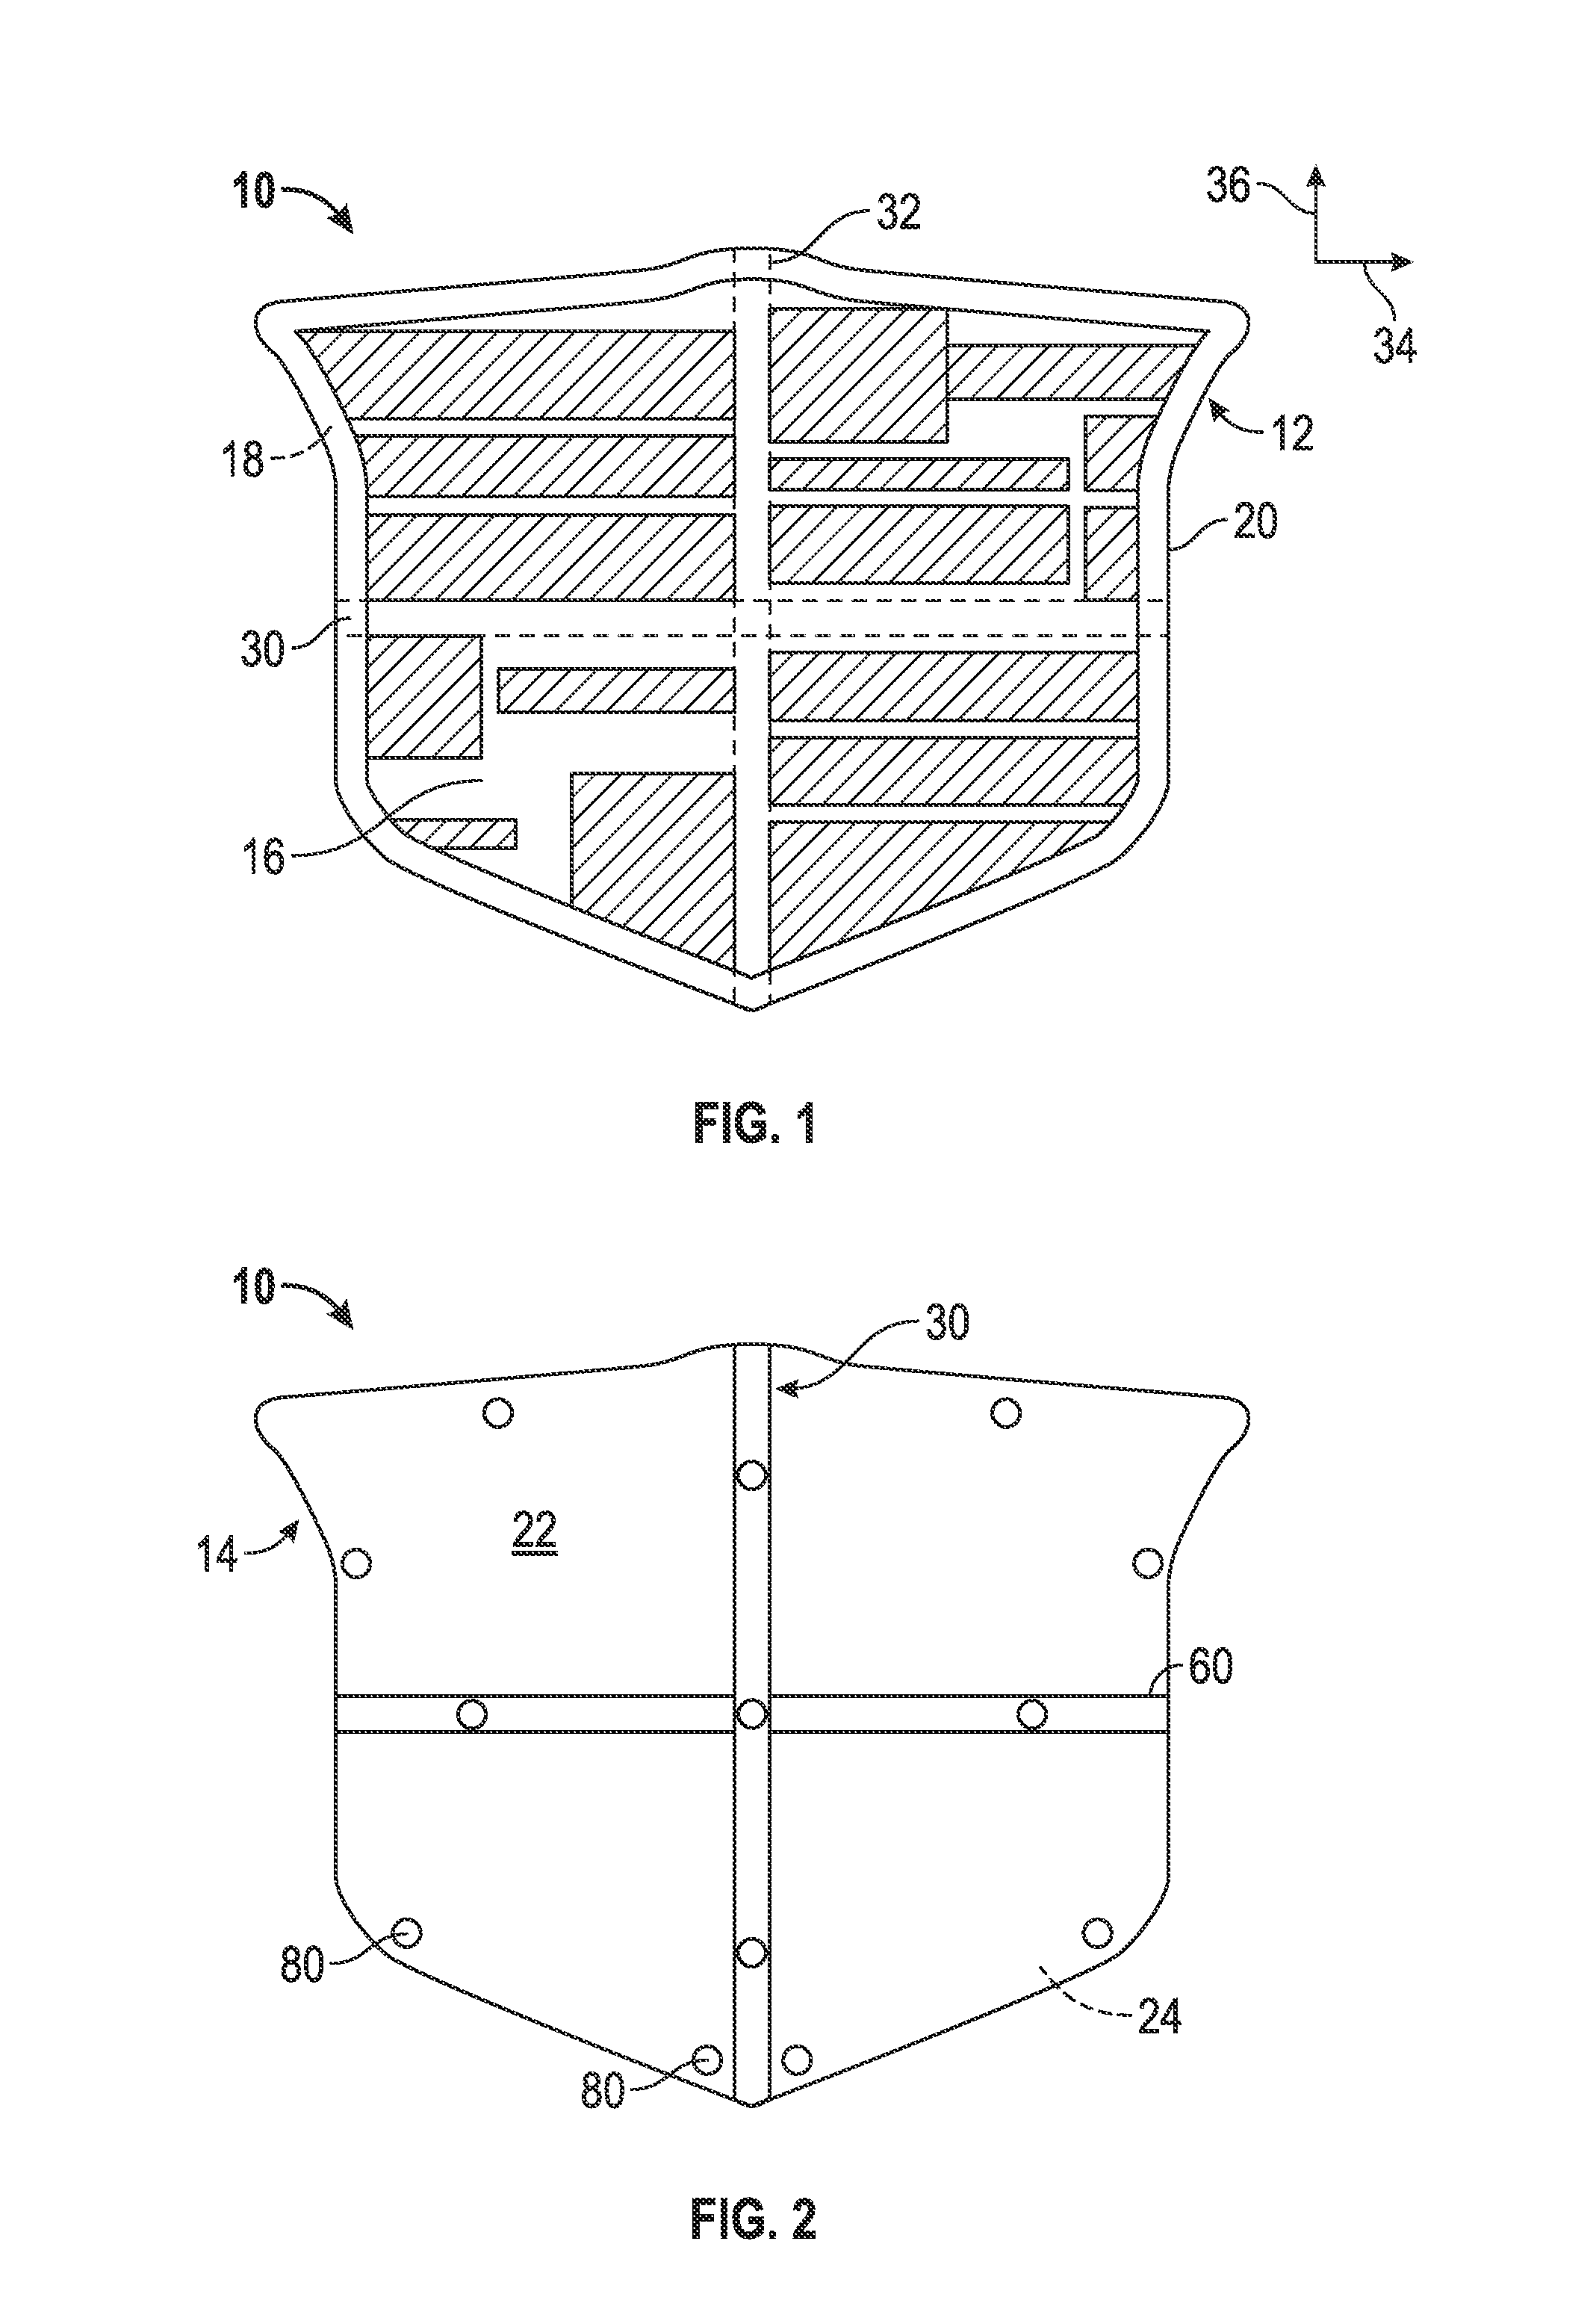 Elastic alignment assembly for aligning mated components and method of reducing postional variation